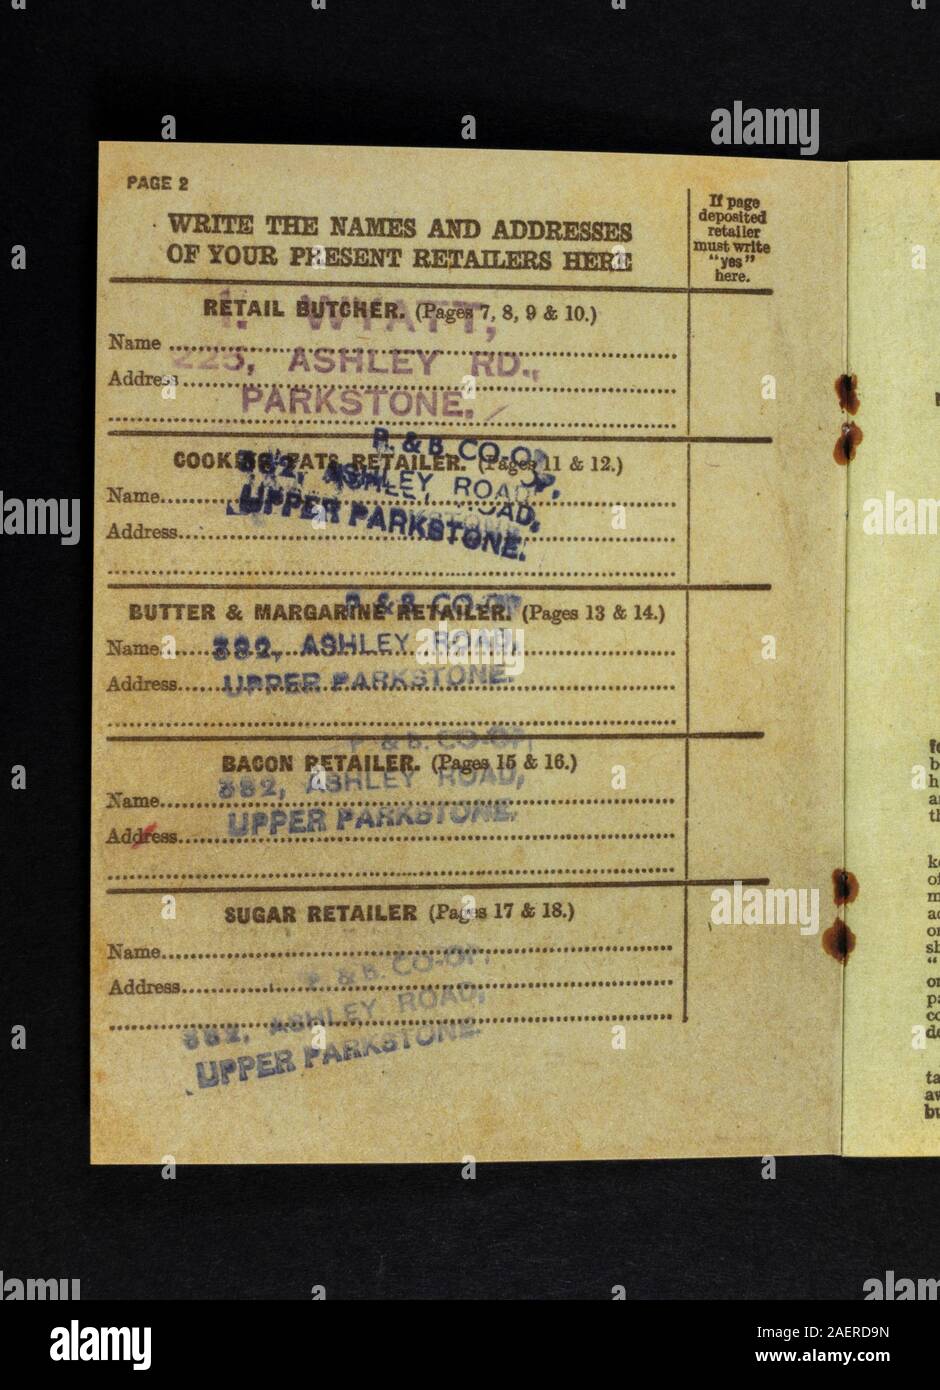 List of retailers inside a replica Ration Book from 1941, a piece of World War II related memorabilia from Britain in the 1940s. Stock Photo